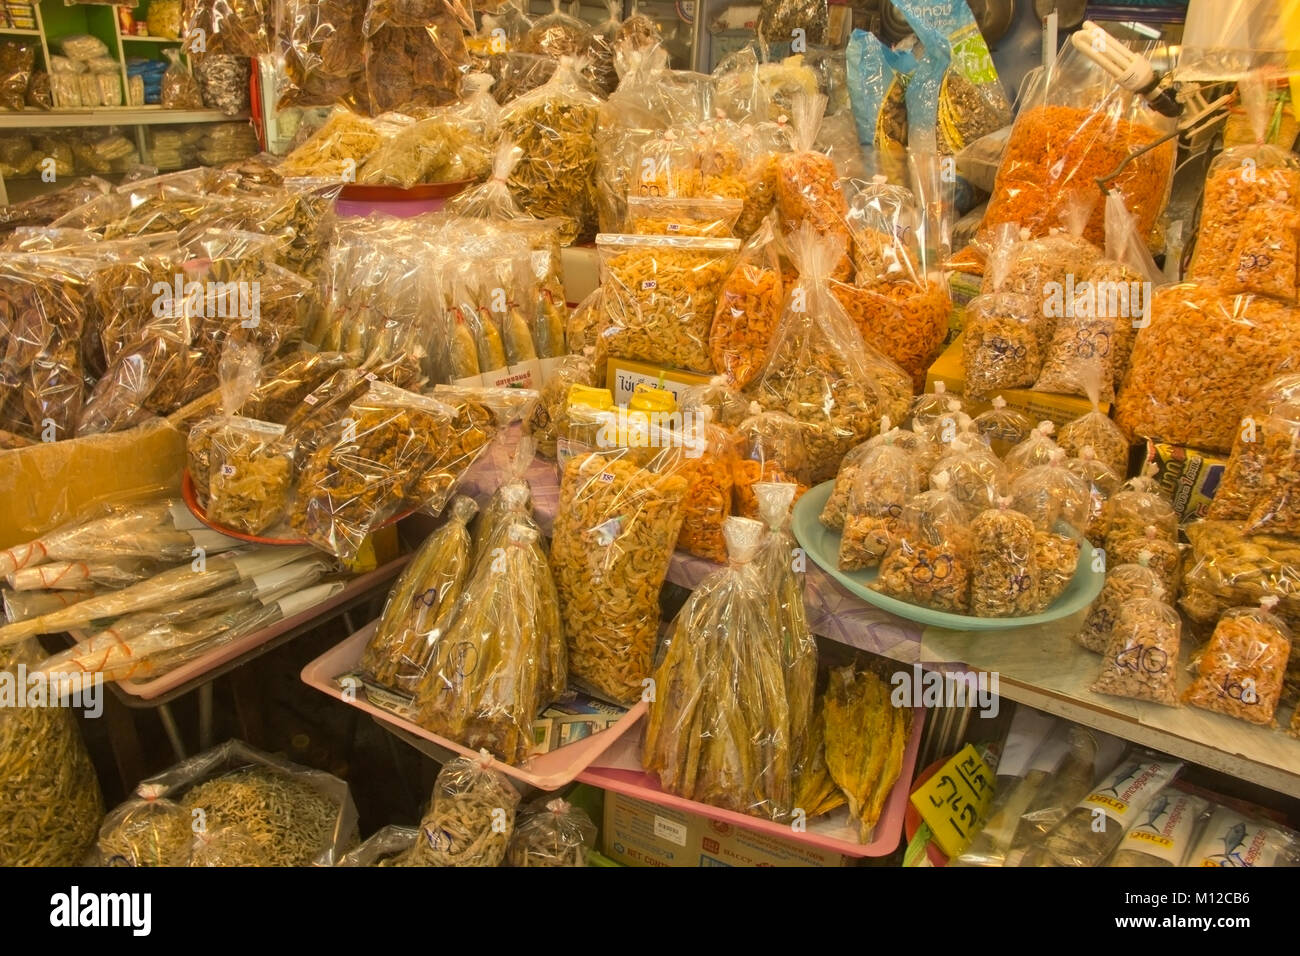 Dried Food, from noodles to fish Stock Photo